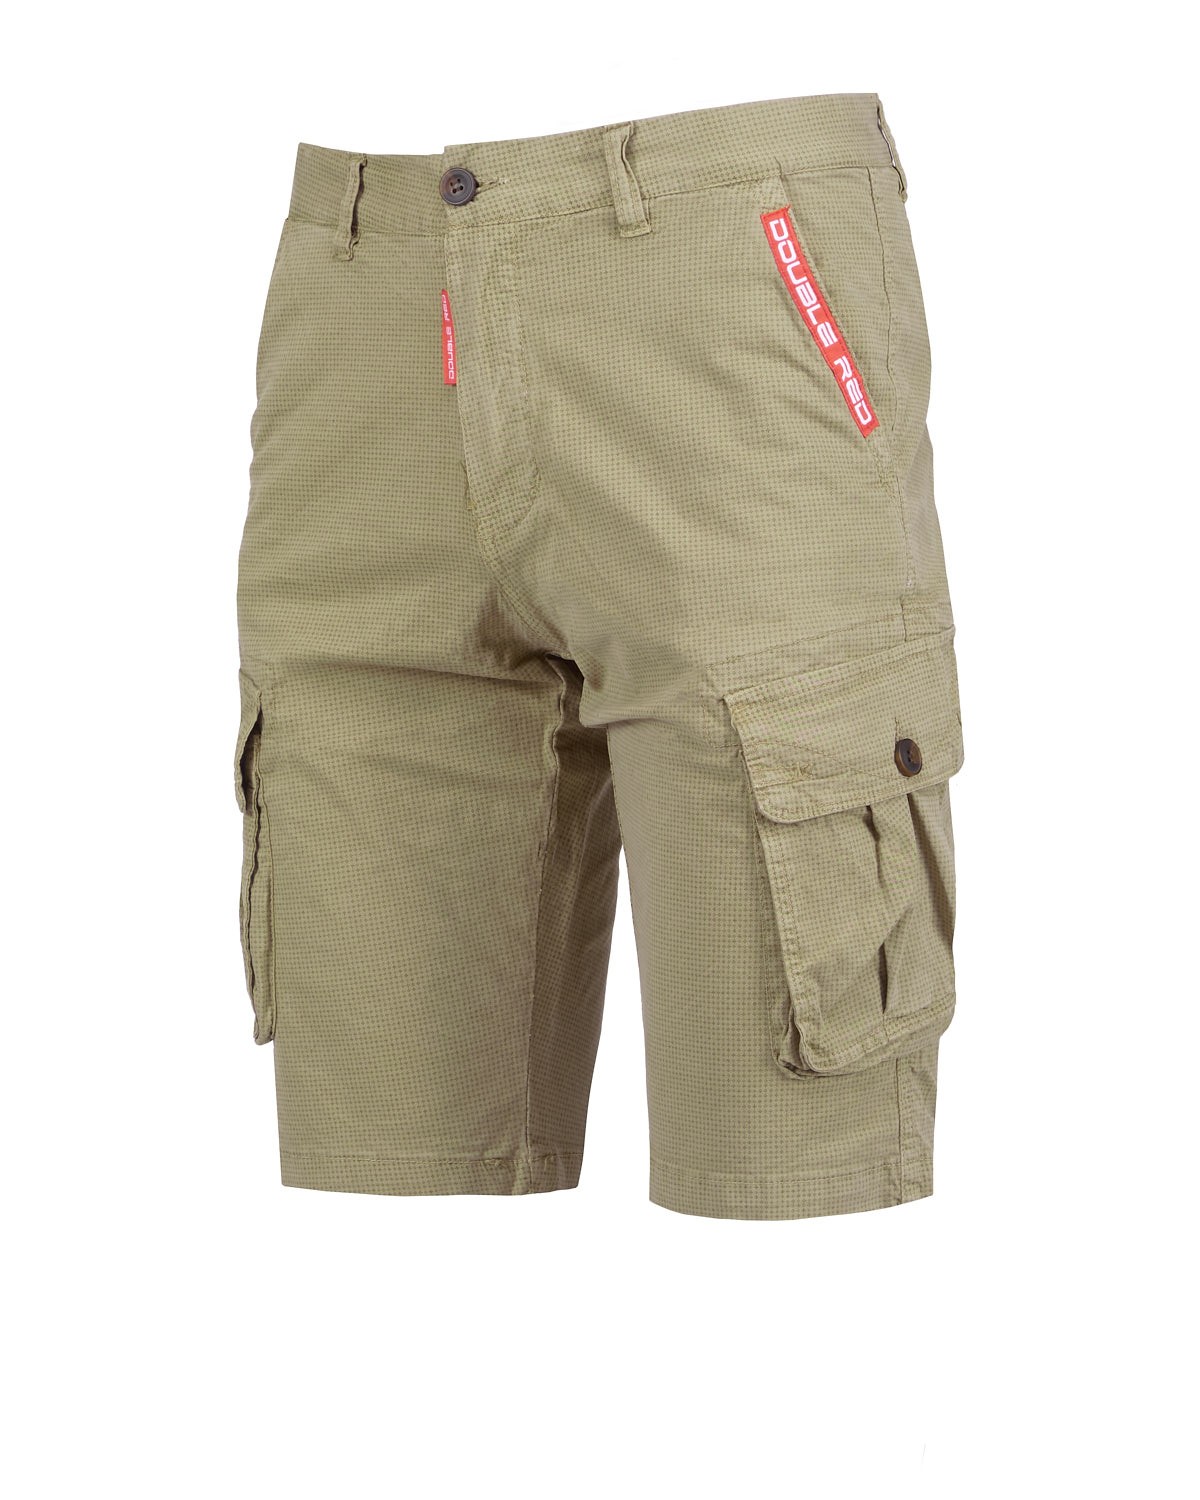 SQUERS Shorts Desert - Red Double